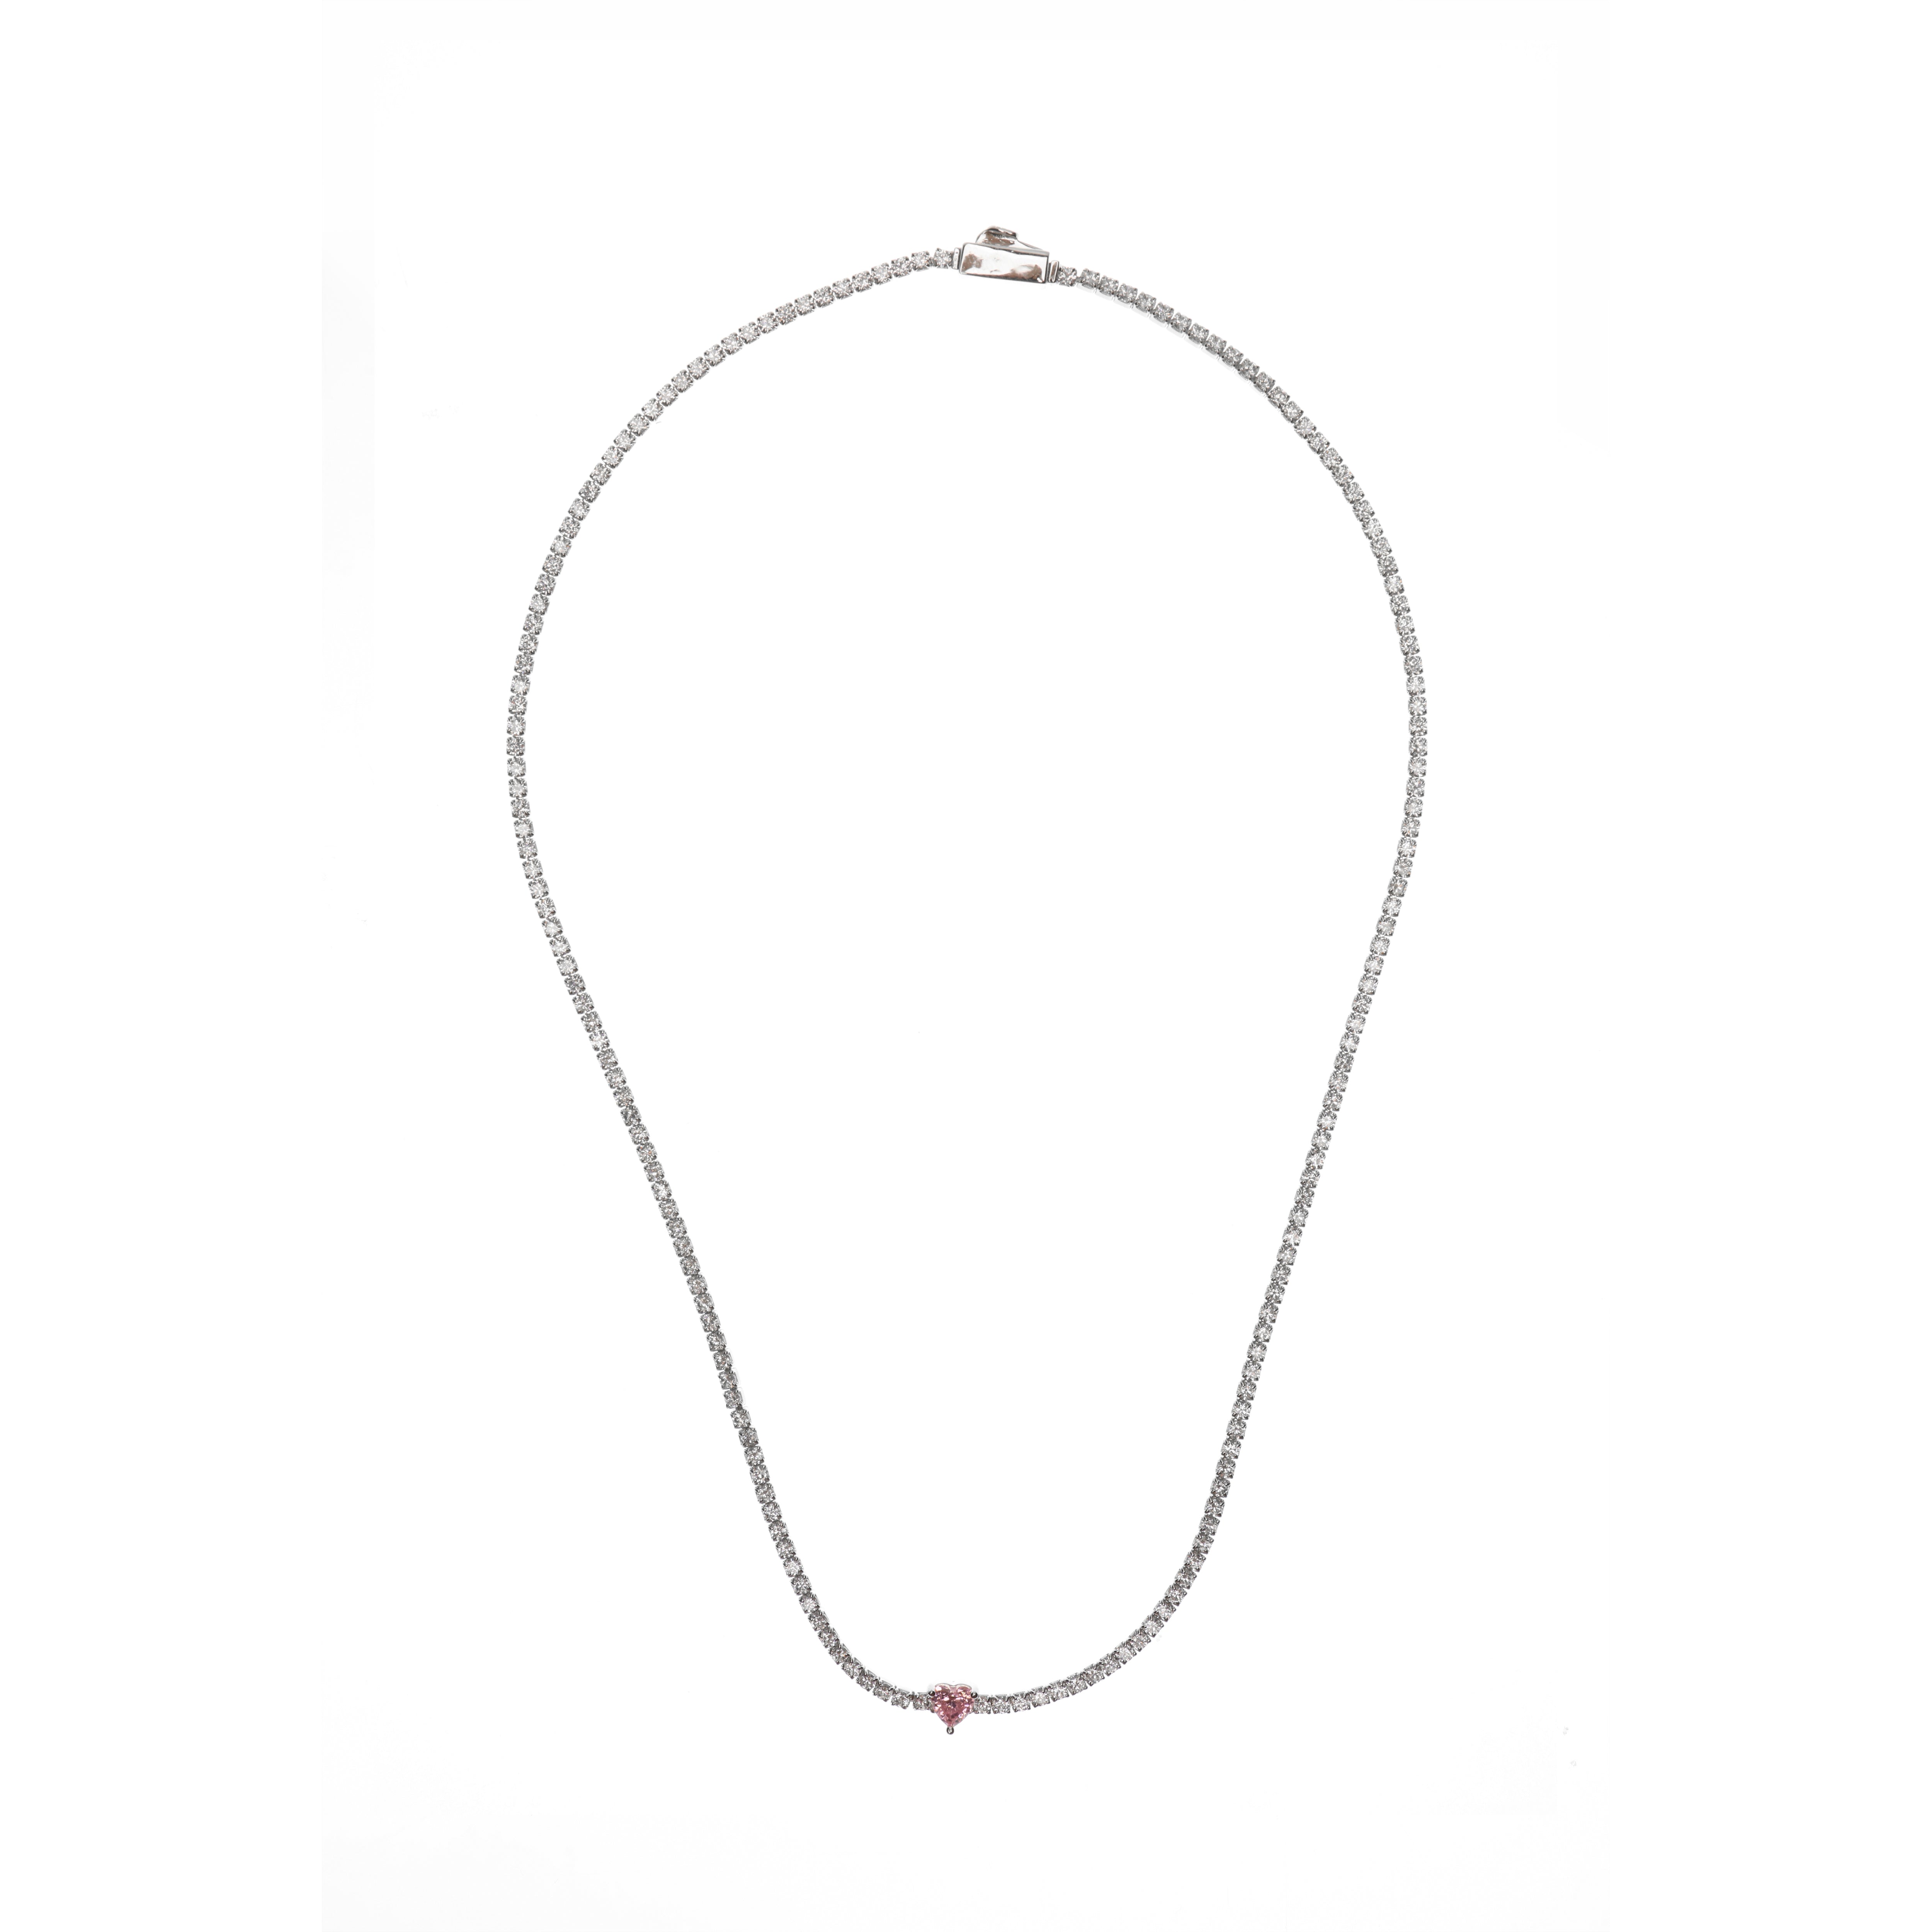 SWEETHEART TENNIS NECKLACE SILVER 42CM